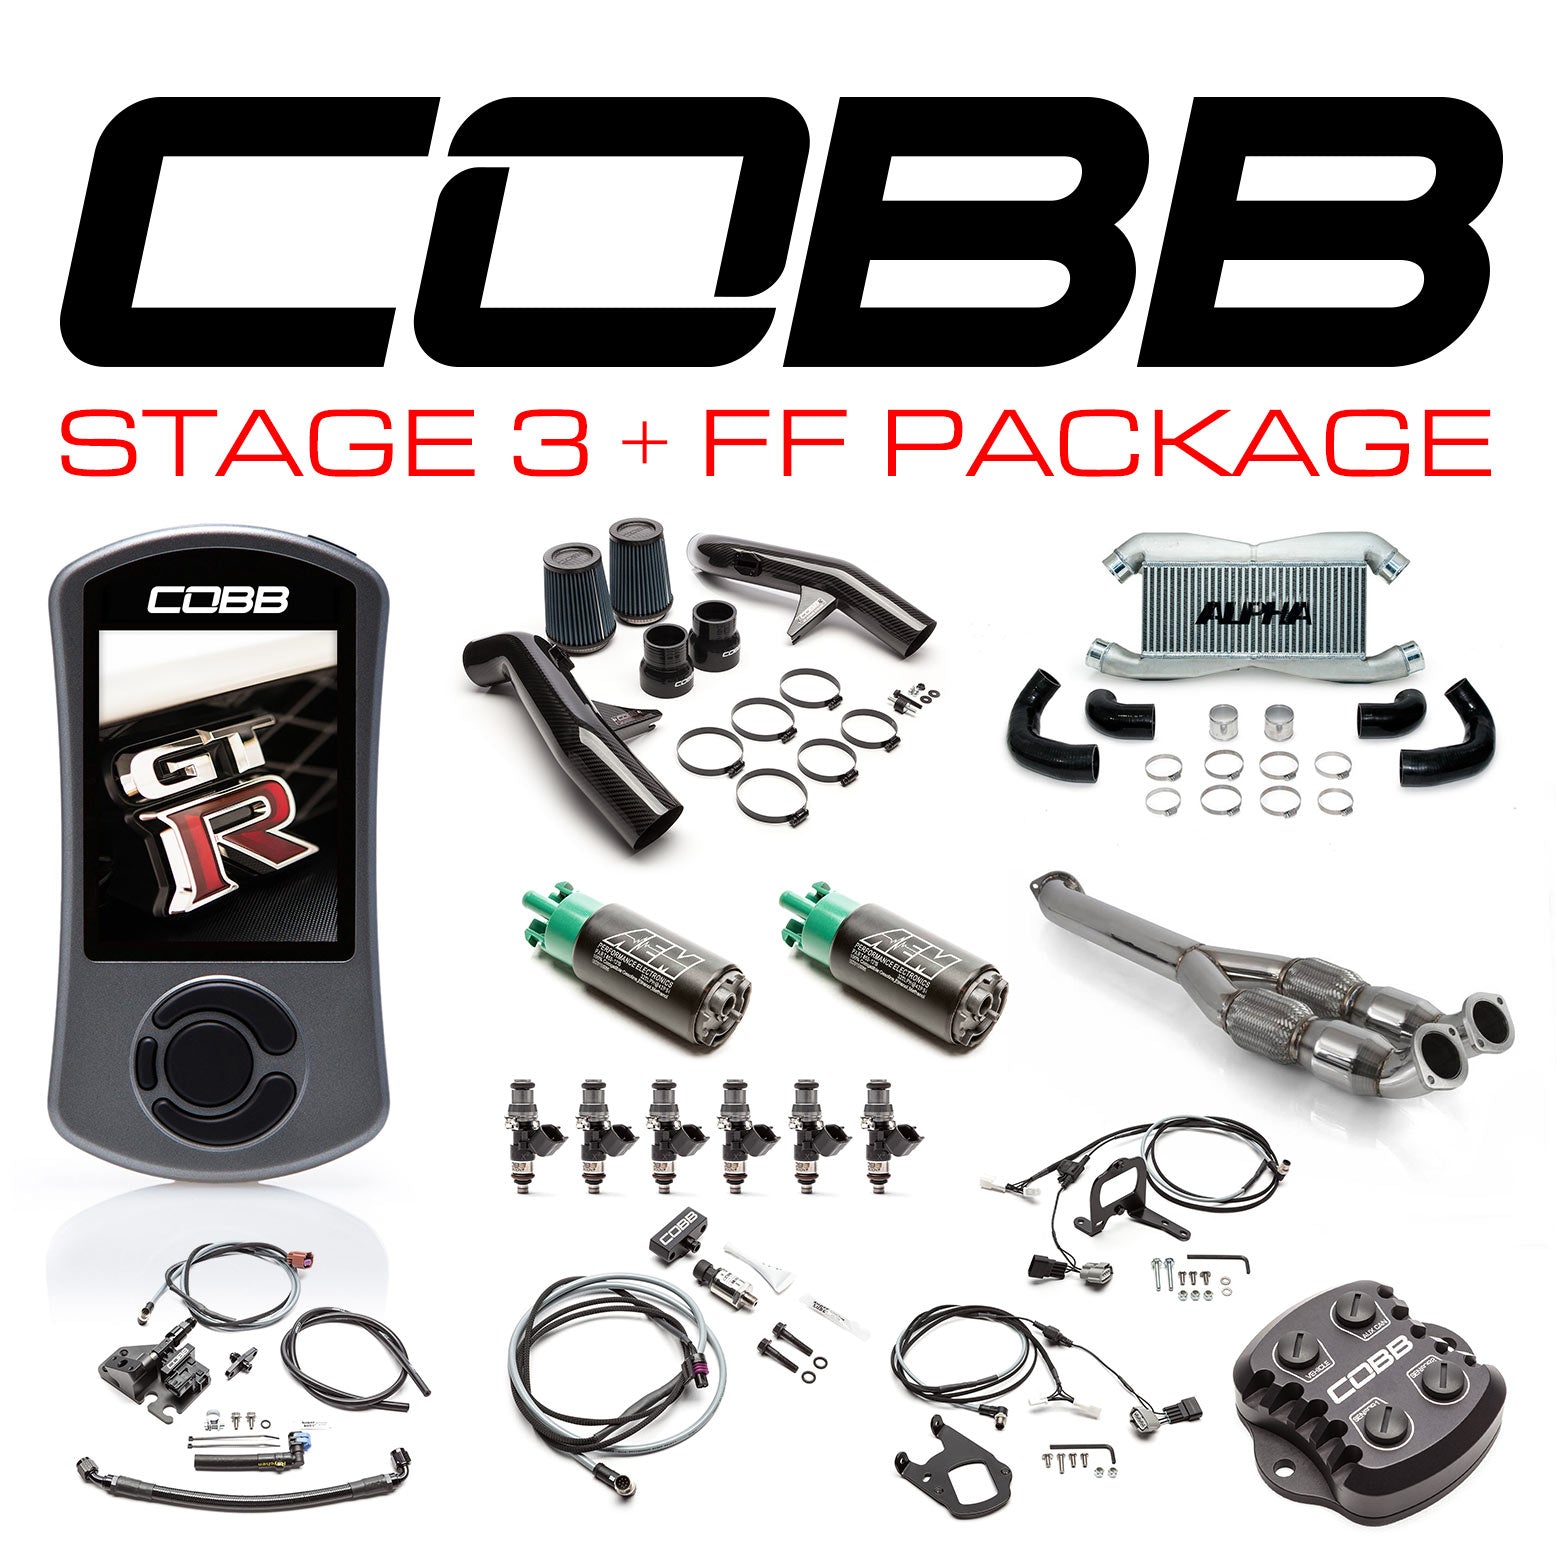 NISSAN GT-R STAGE 3 + CAN GATEWAY + FF CARBON FIBER POWER PACKAGE NIS-006 WITH TCM FLASHING